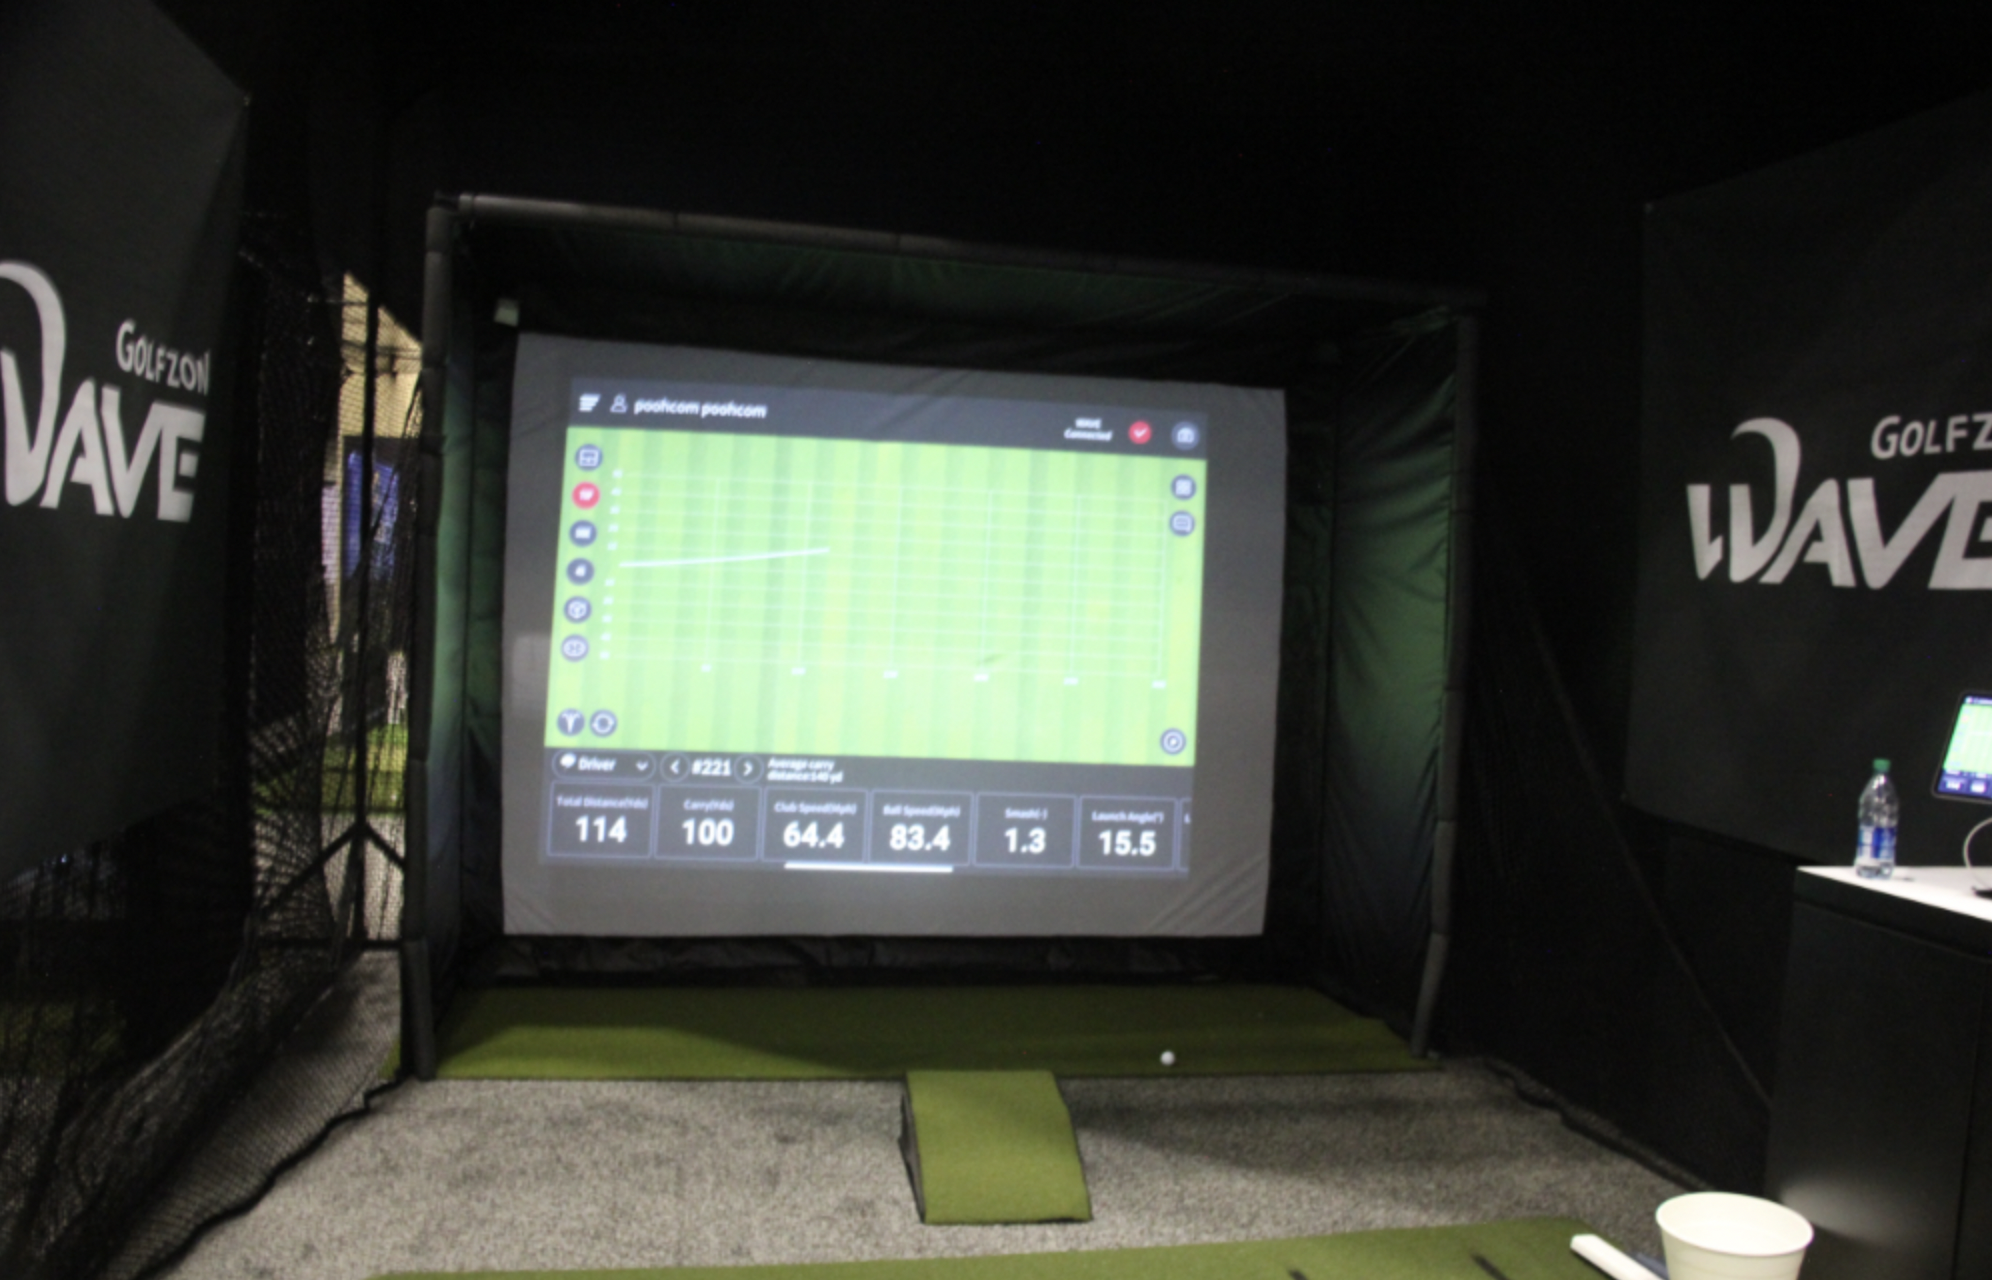 GSC Fairway and putting mat, compatible with Golfzon and other simulators